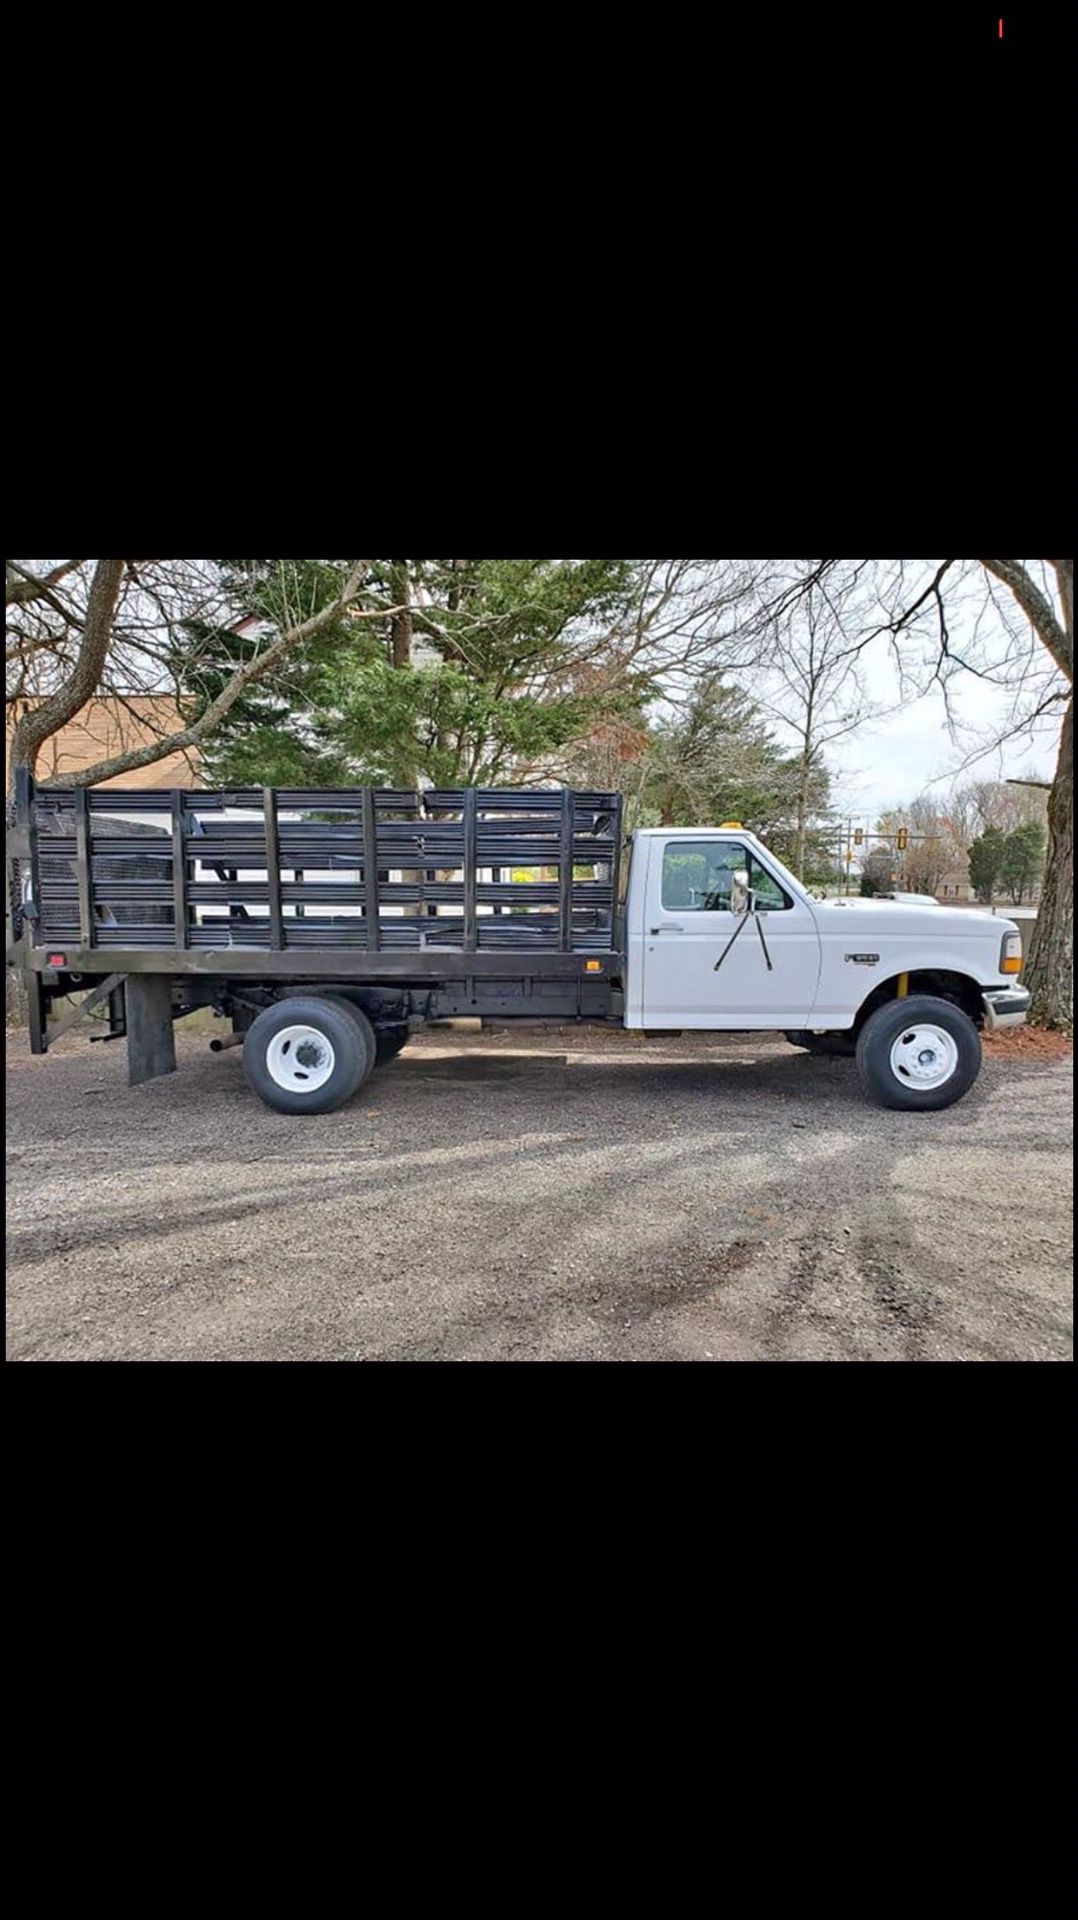 1997 Ford F-450